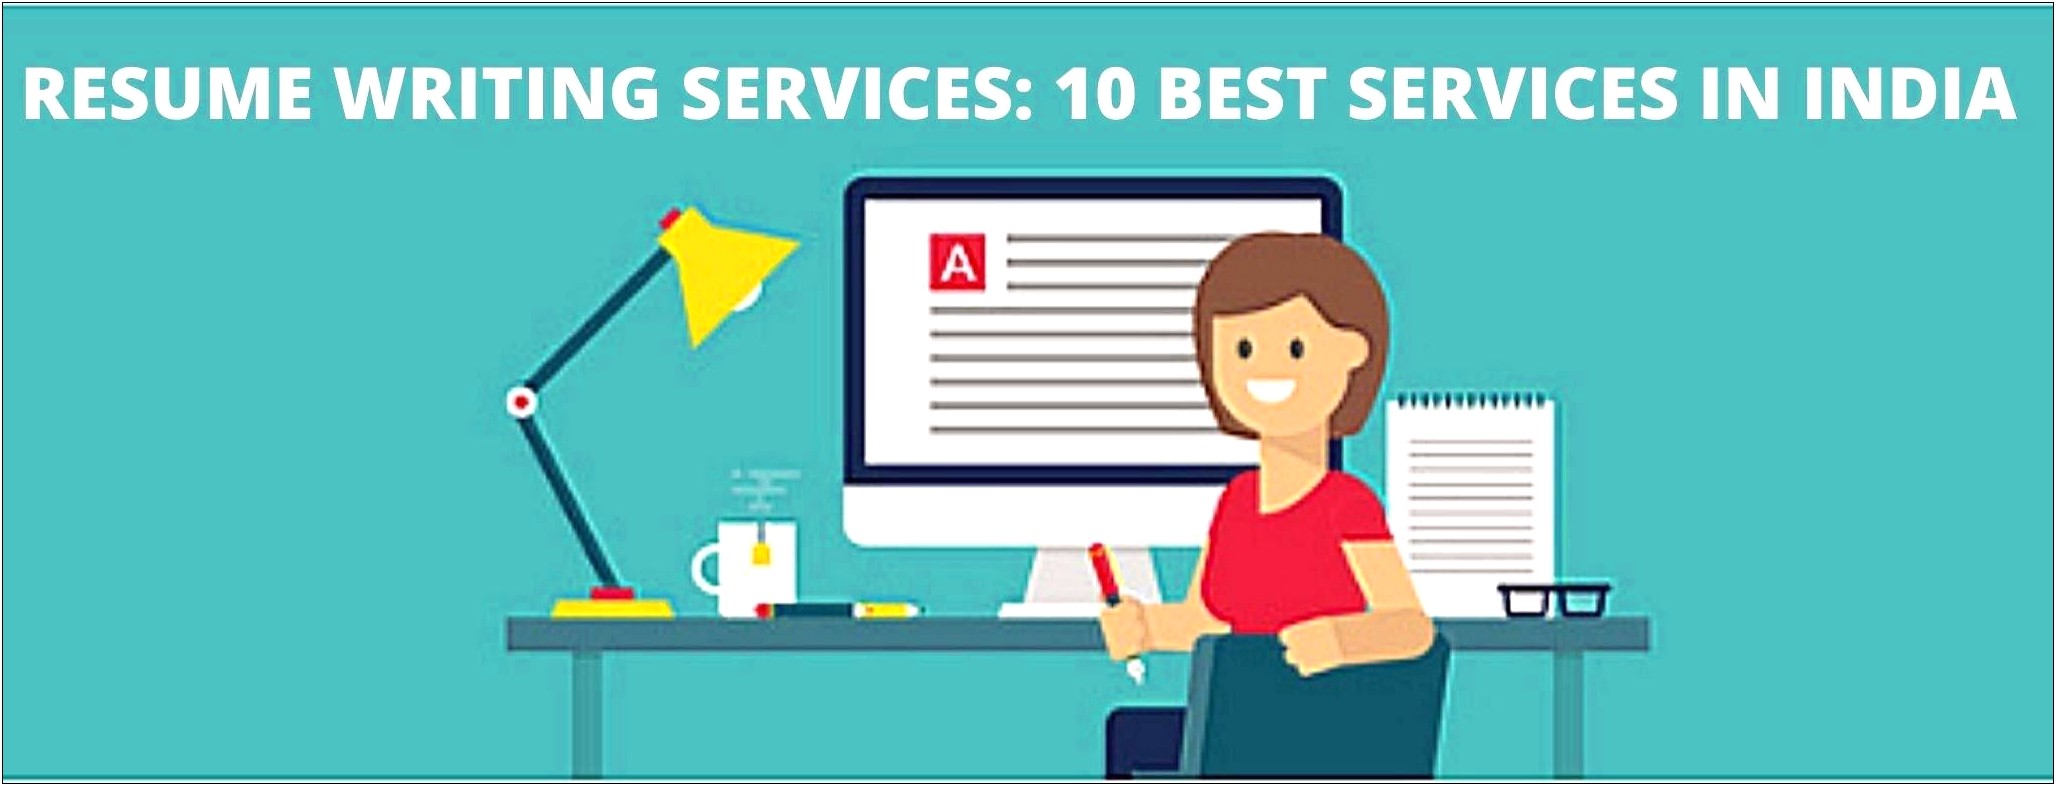 Top 10 Best Resume Writing Services